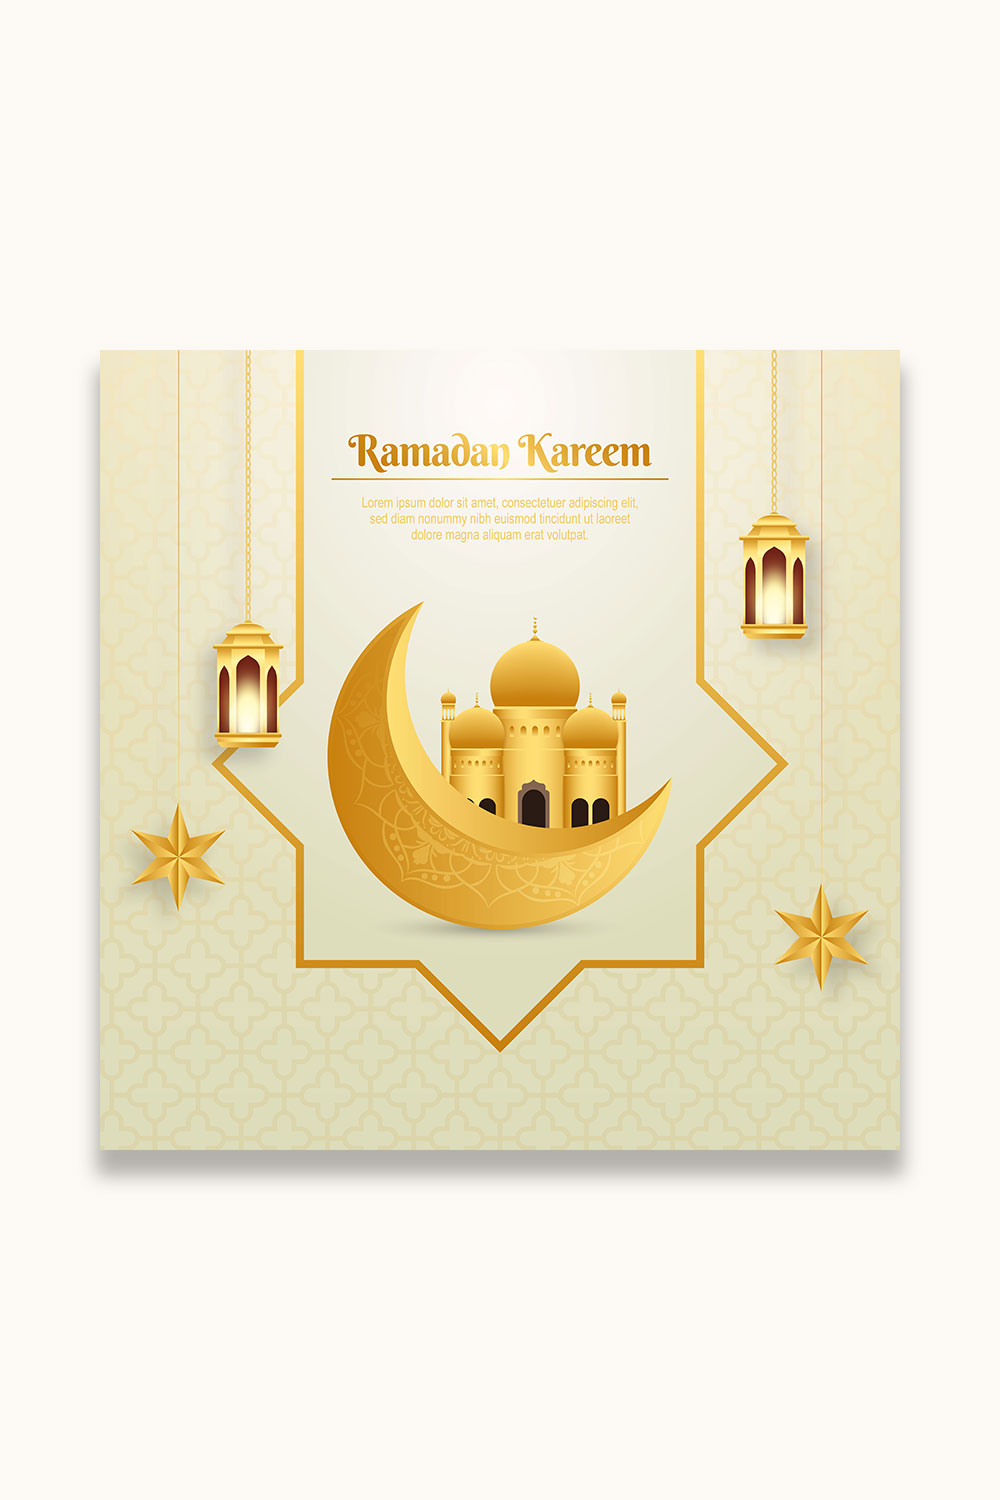 Elegant Ramadan kareem decorative festival greeting card with 3d moon and Islamic background pinterest preview image.